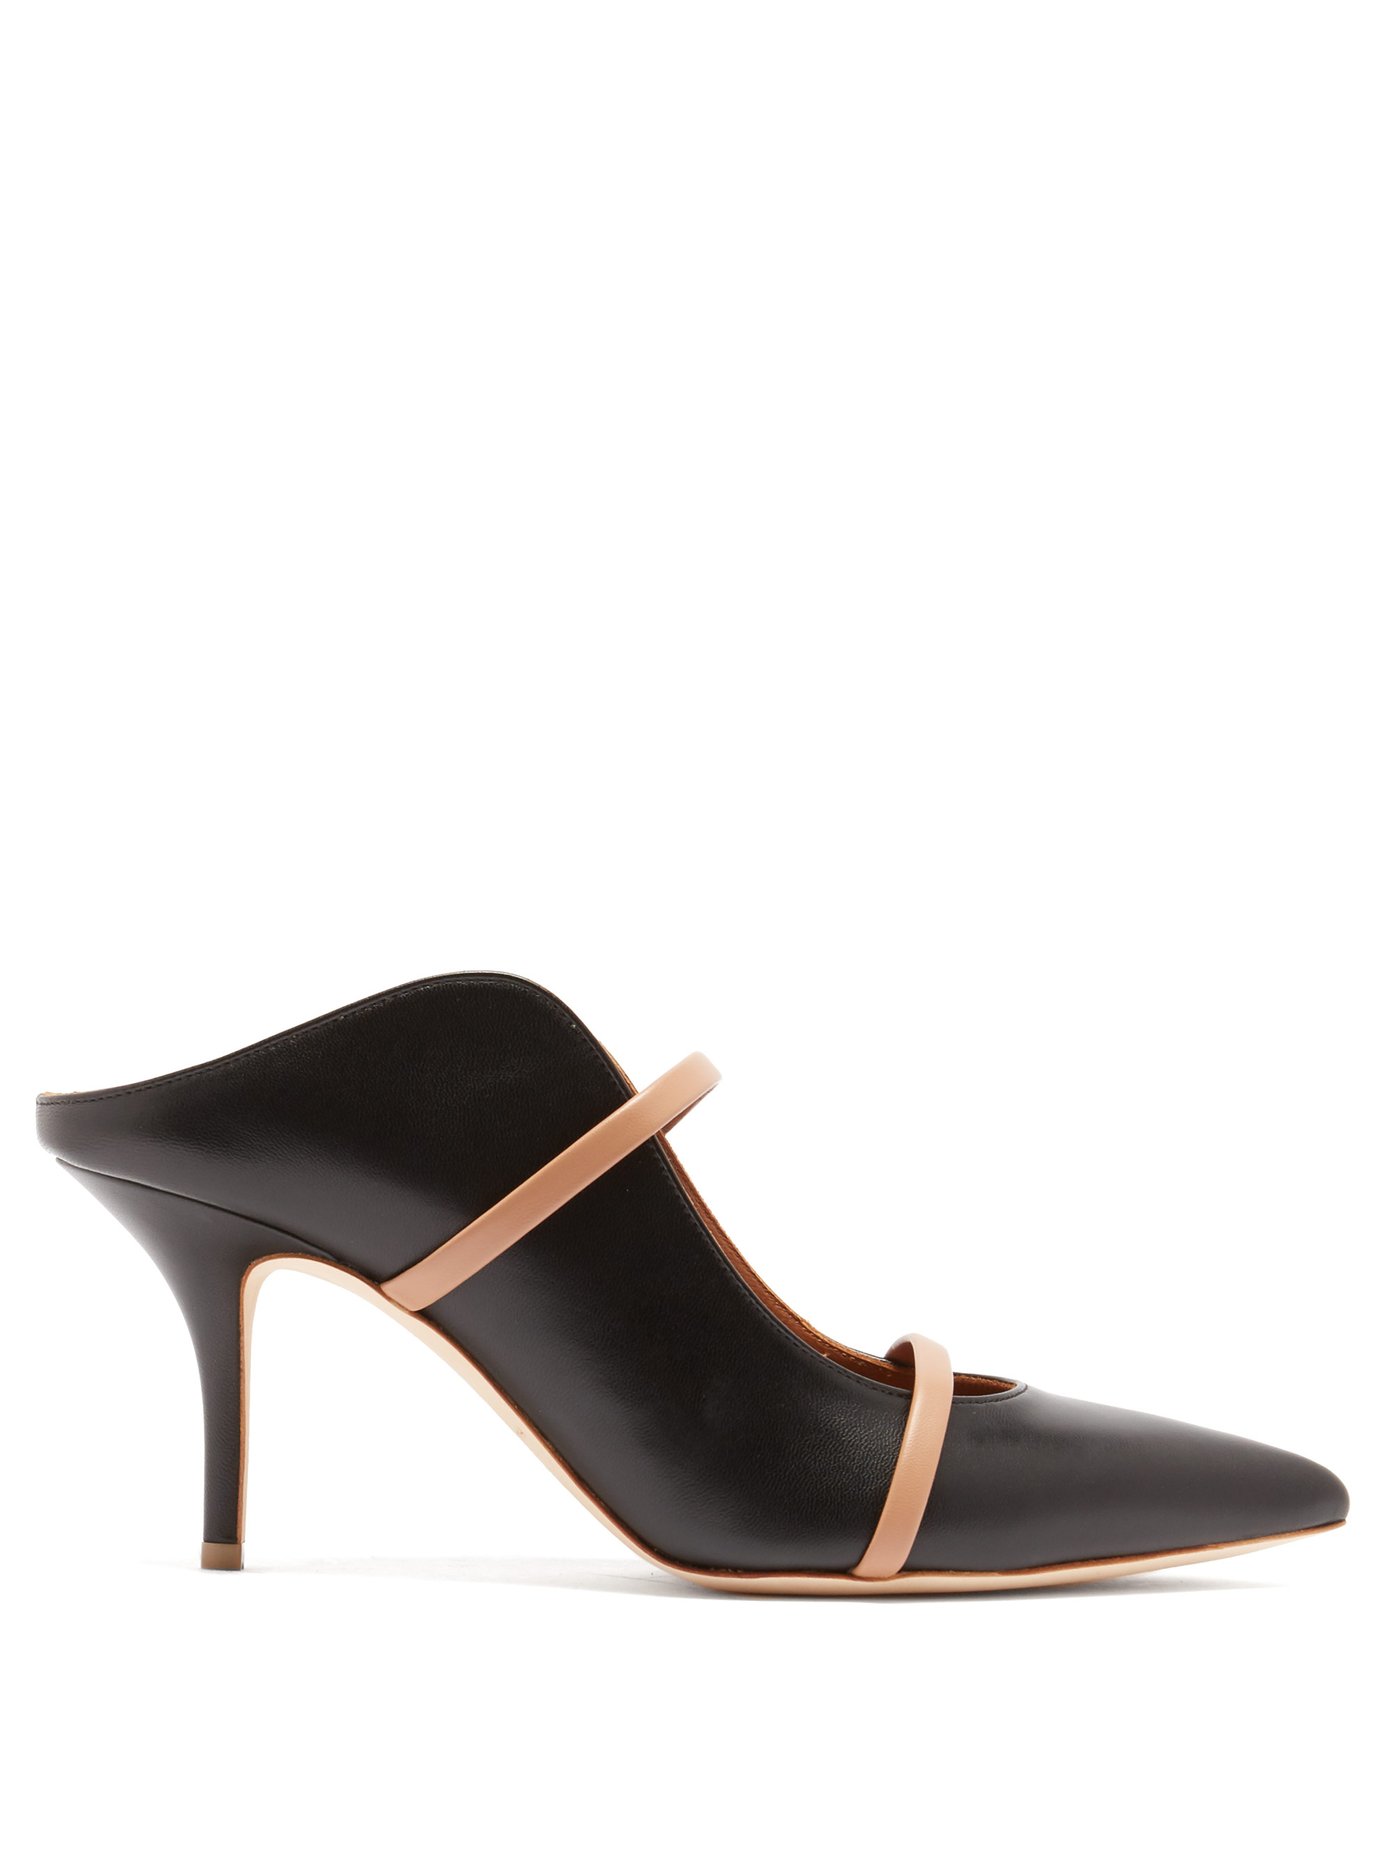 malone souliers maureen leather mules